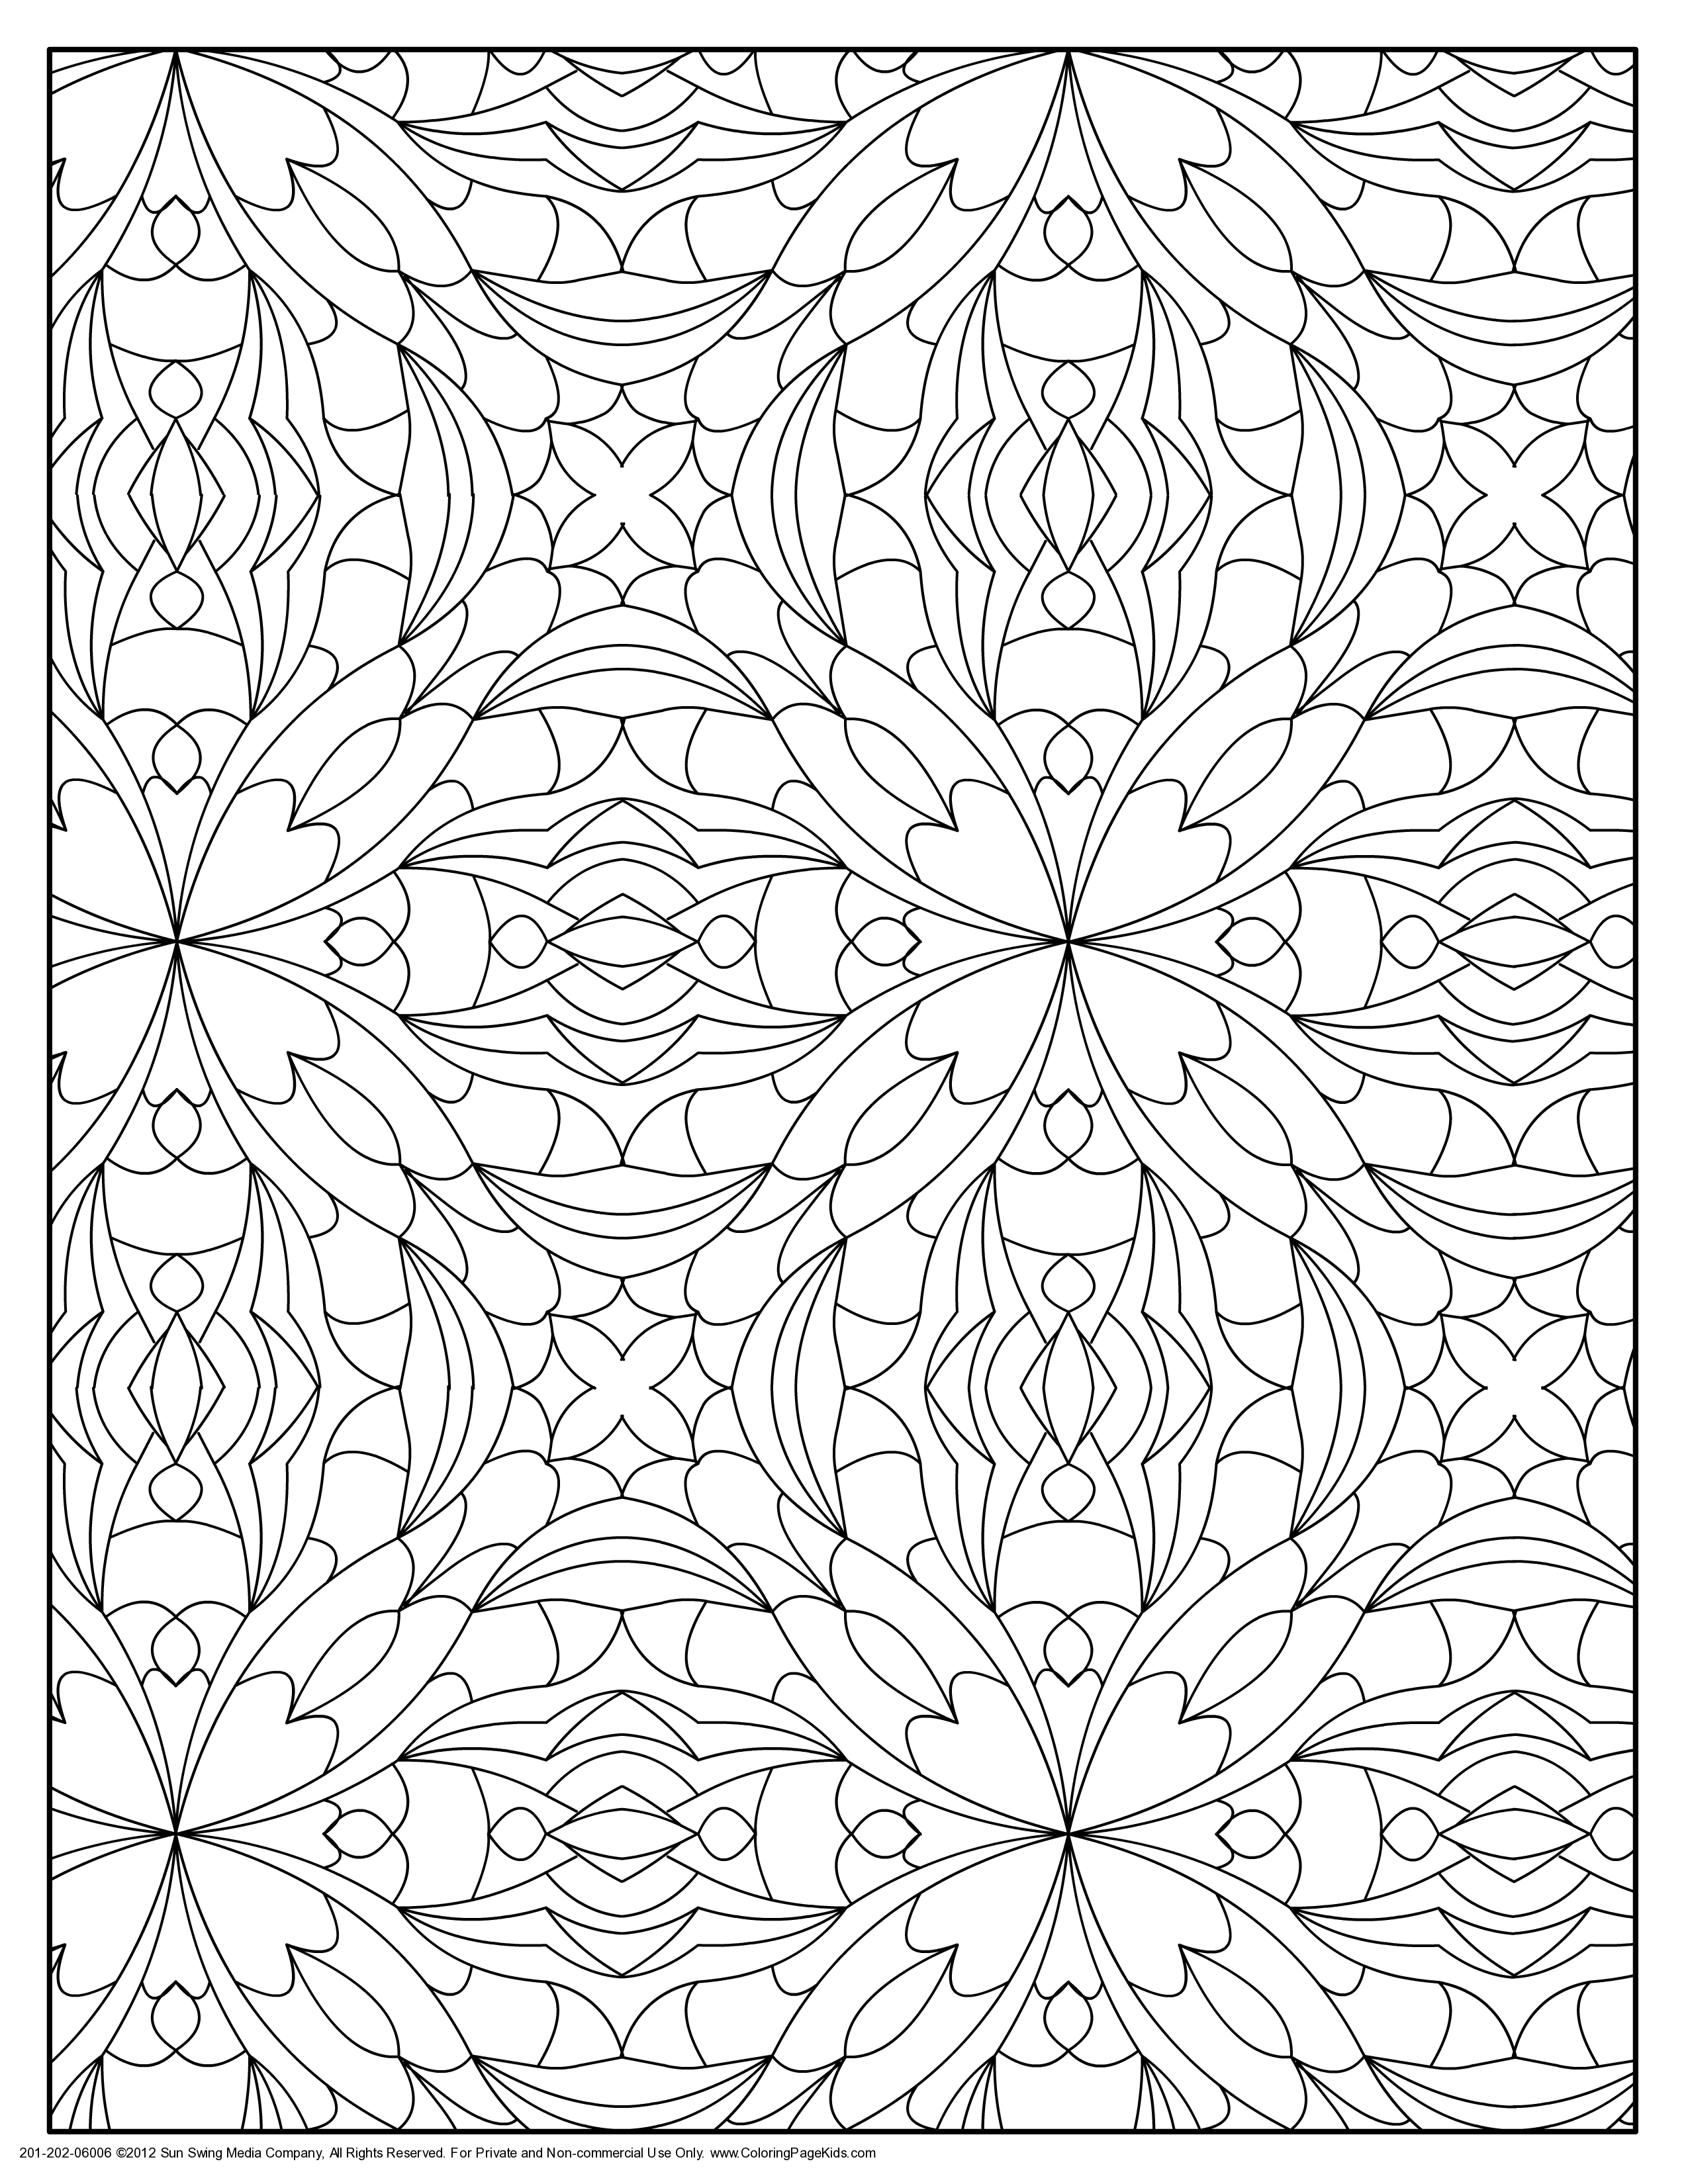 colouring sheets patterns pattern coloring pages the sun flower pages patterns colouring sheets 